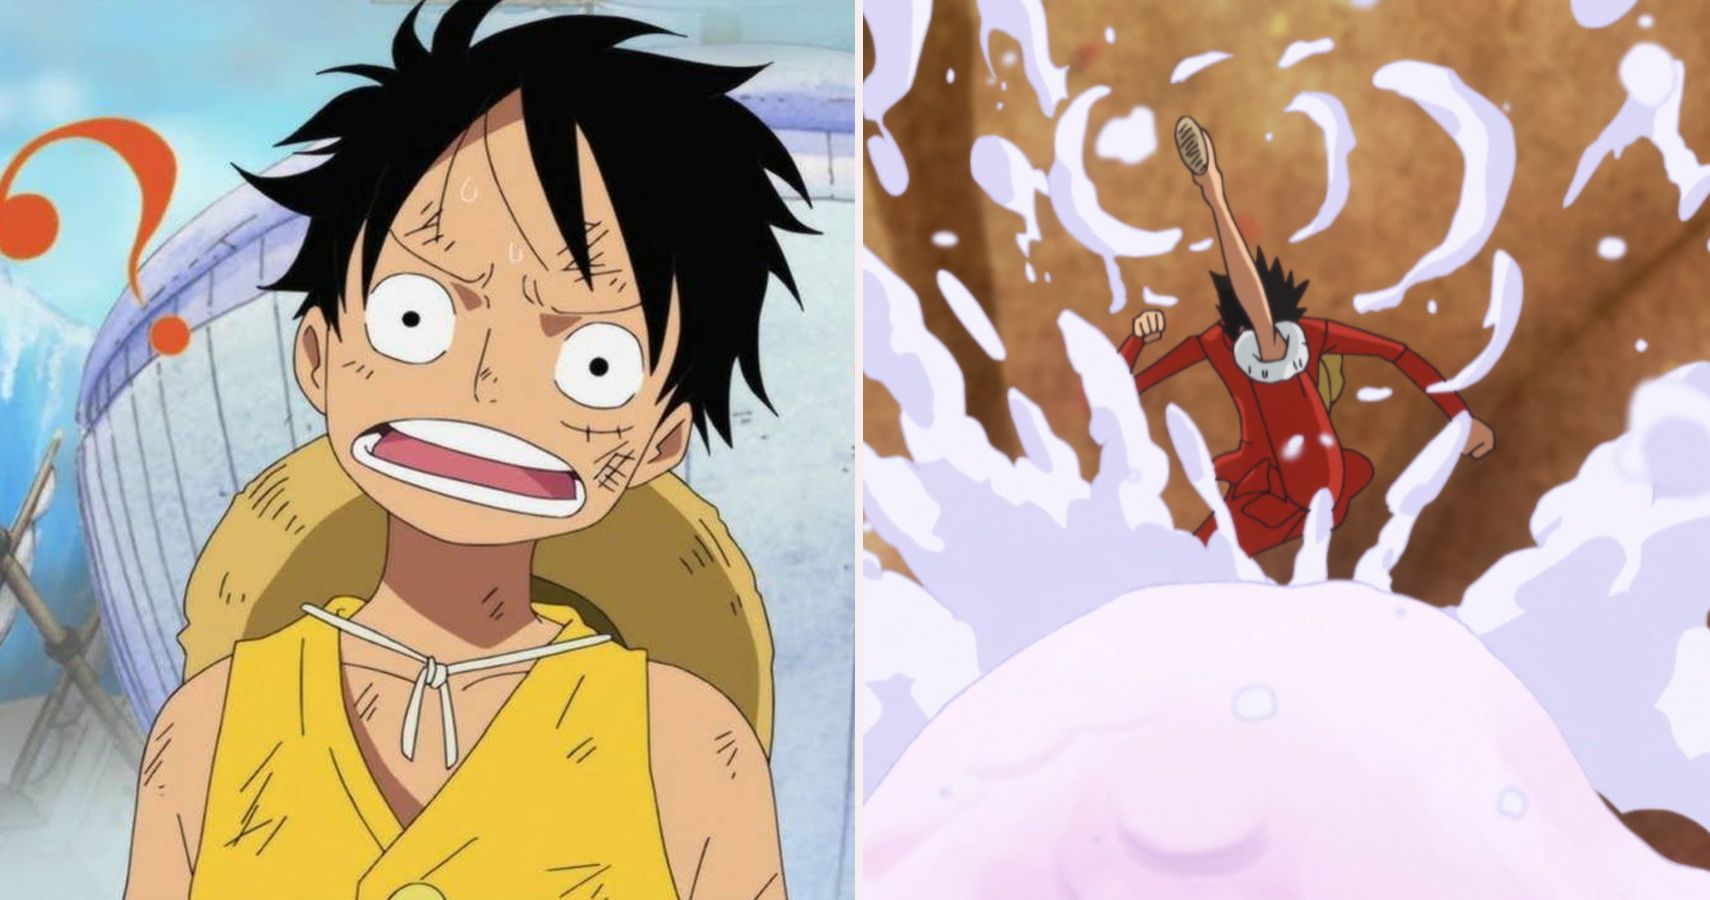 The Best Monkey D. Luffy Quotes of All Time (With Images)